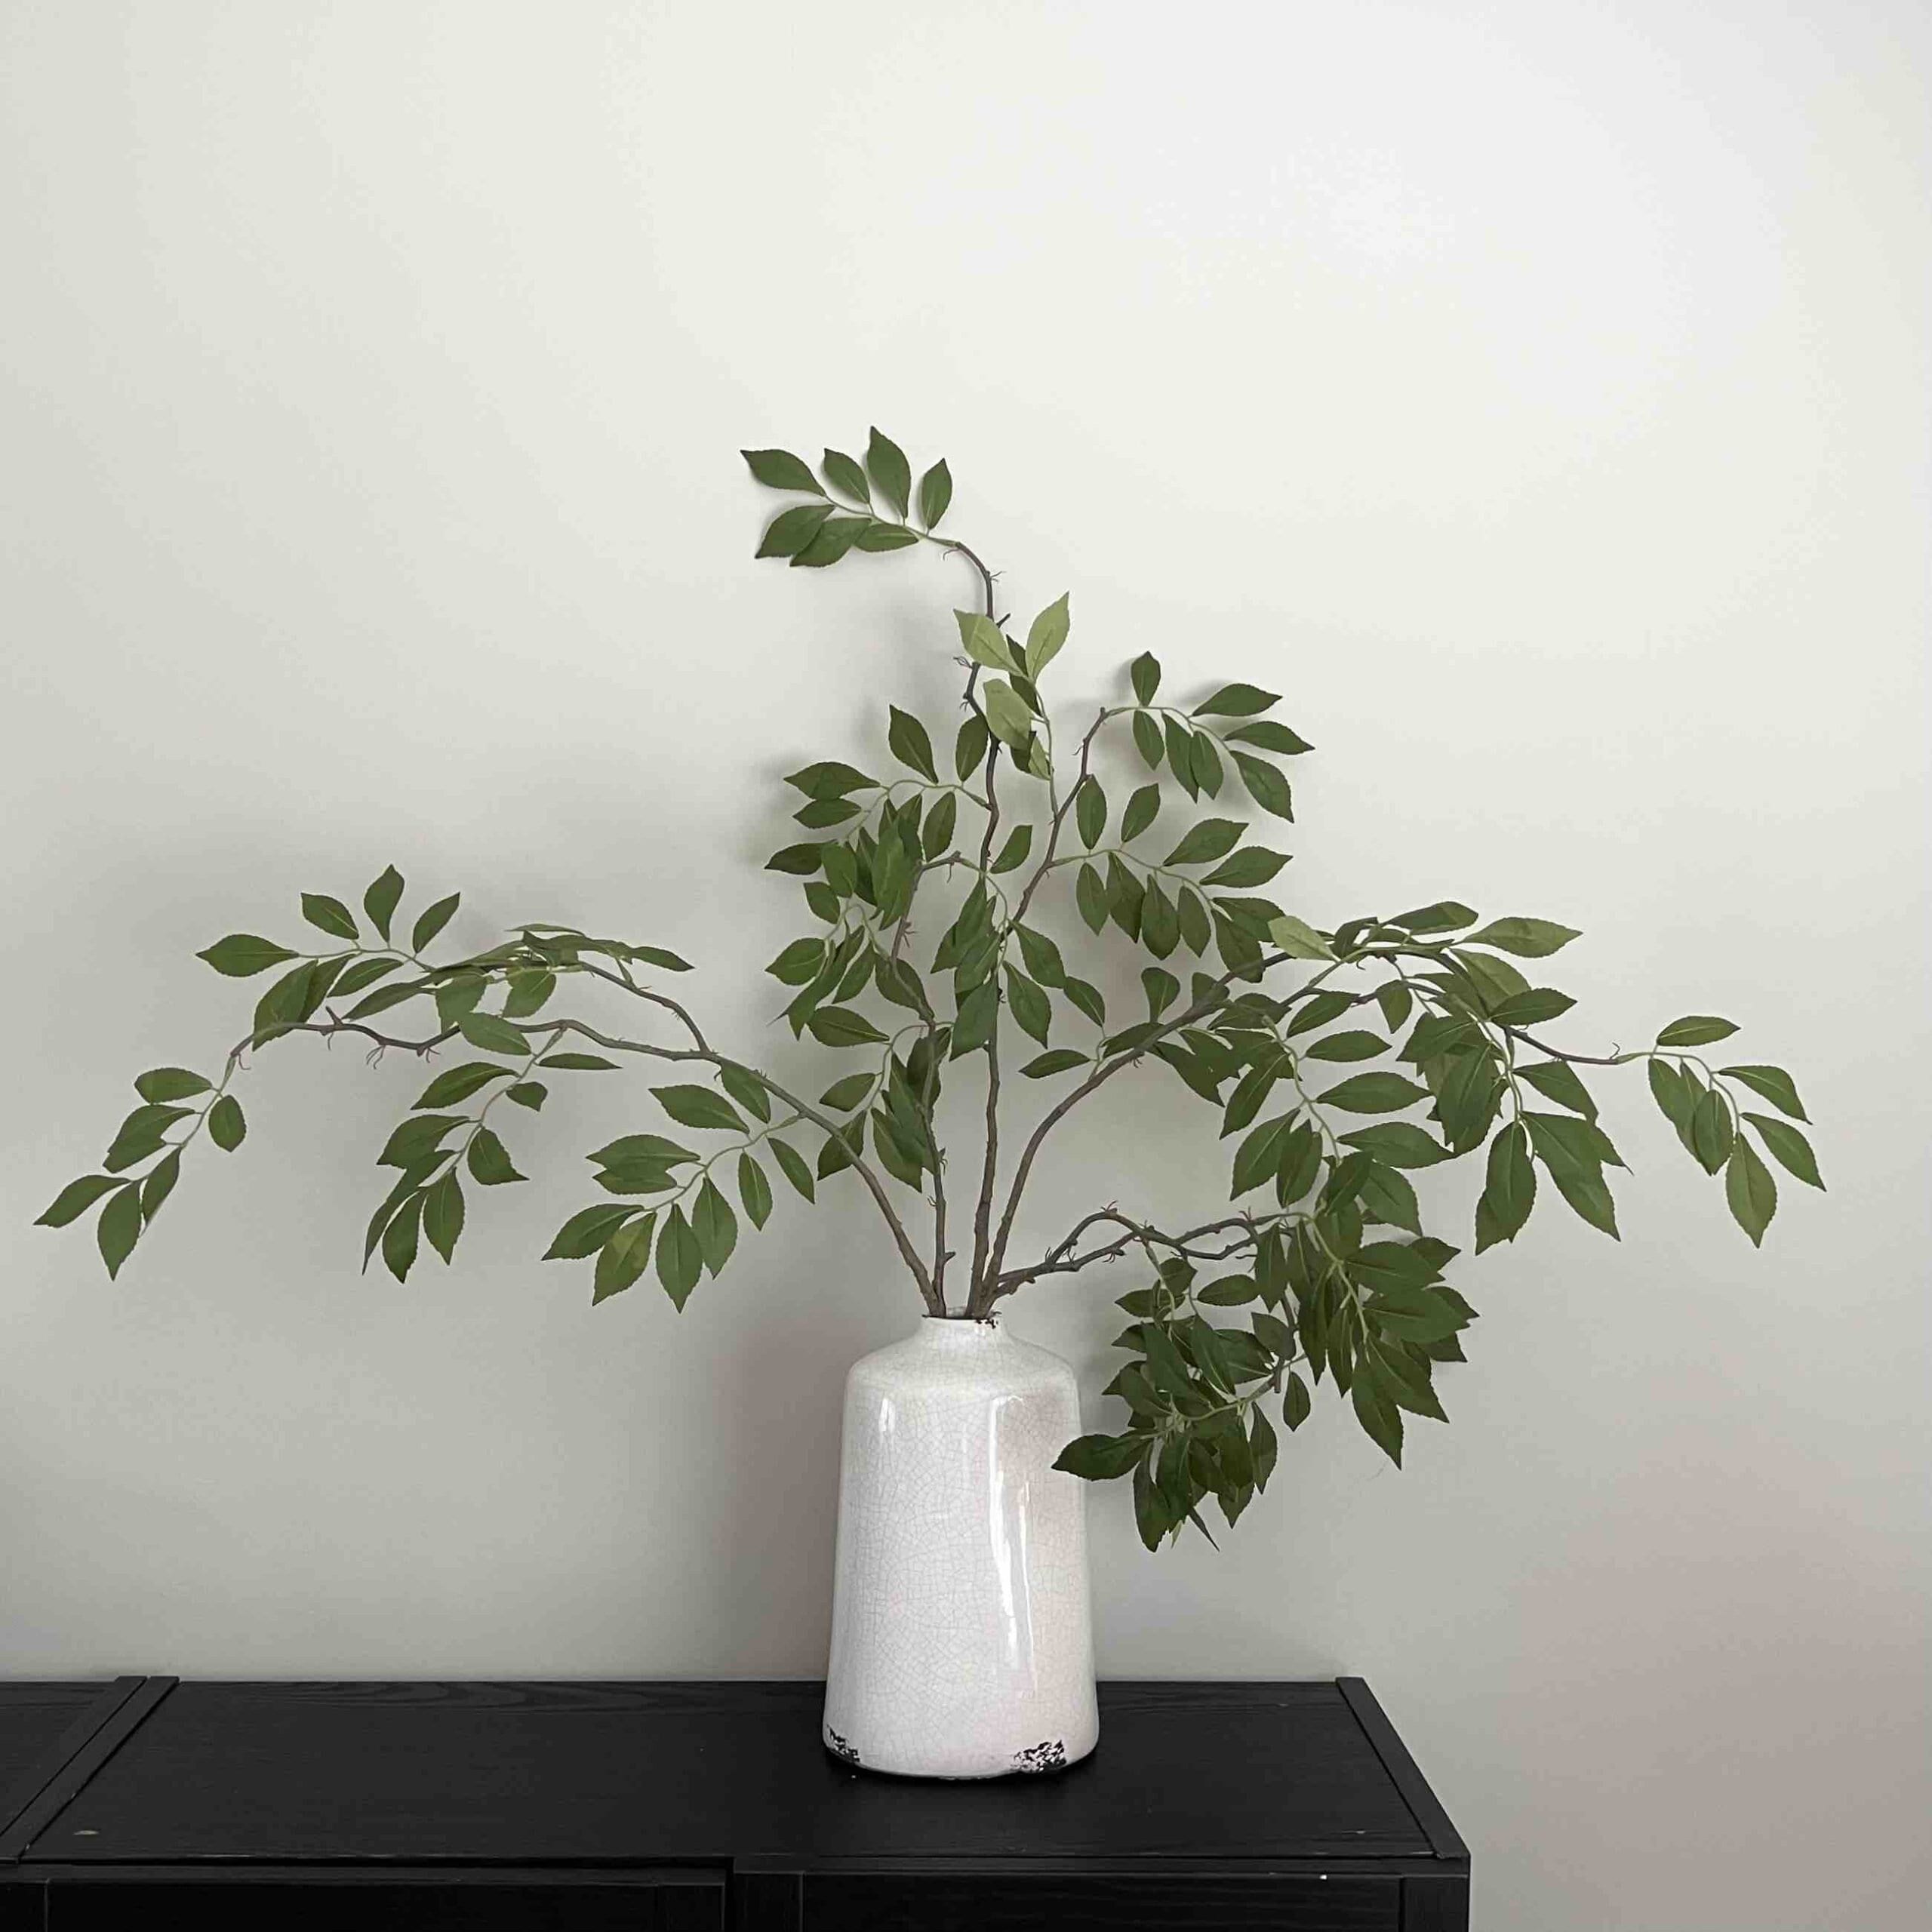  ASTIDY Eucalyptus Tree Artificial - 5FT Faux Eucalyptus Tree in  Pot - Fake Eucalyptus Plant - Silver Dollar Leaves Silk Trees - Artificial  Tree for Home Office Living Room Floor Decor